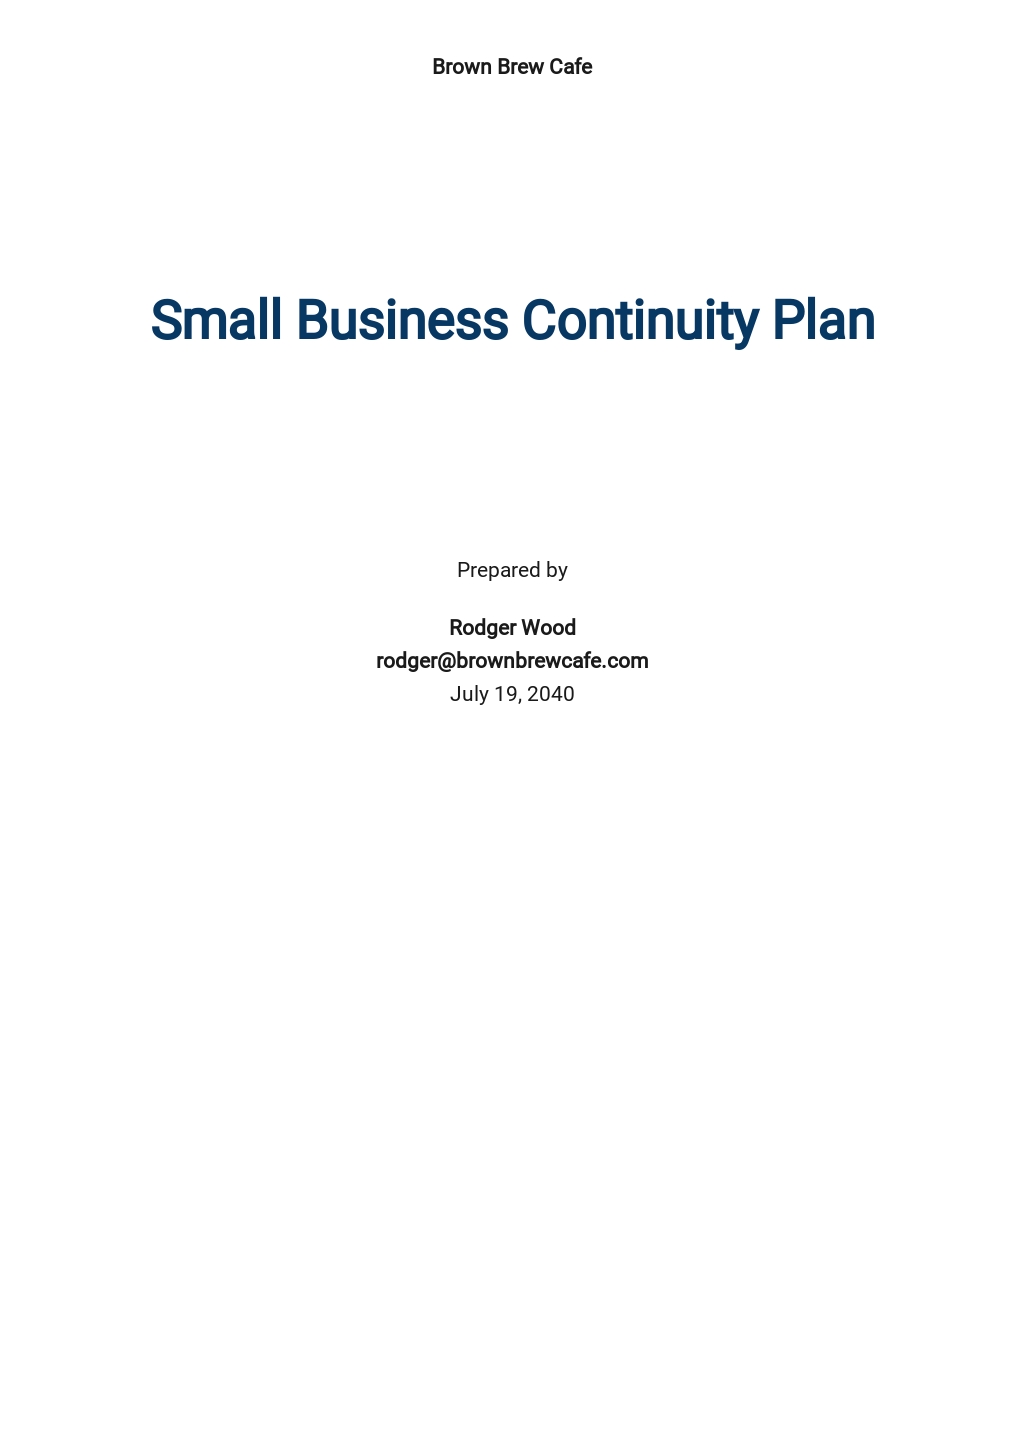 Small Business Continuity Plan Template